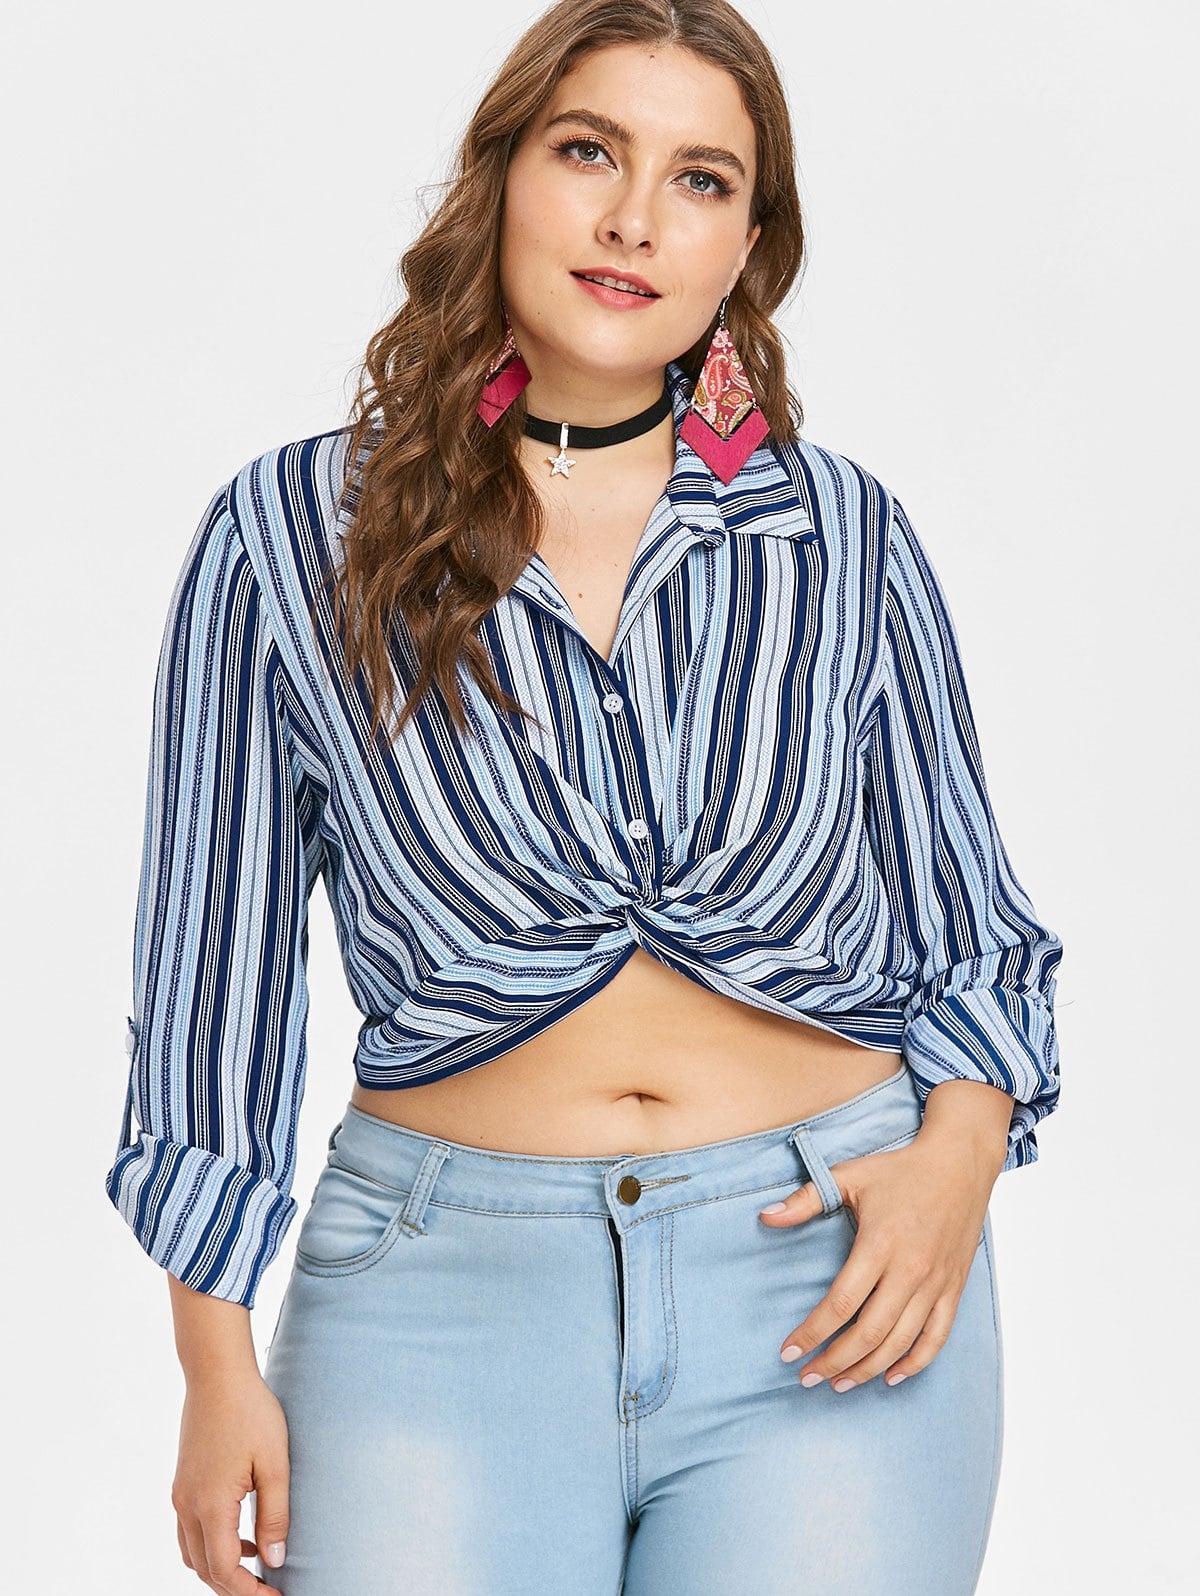 Top 7 Crop Top Styles To Dazzle Your Occasions - Techicy